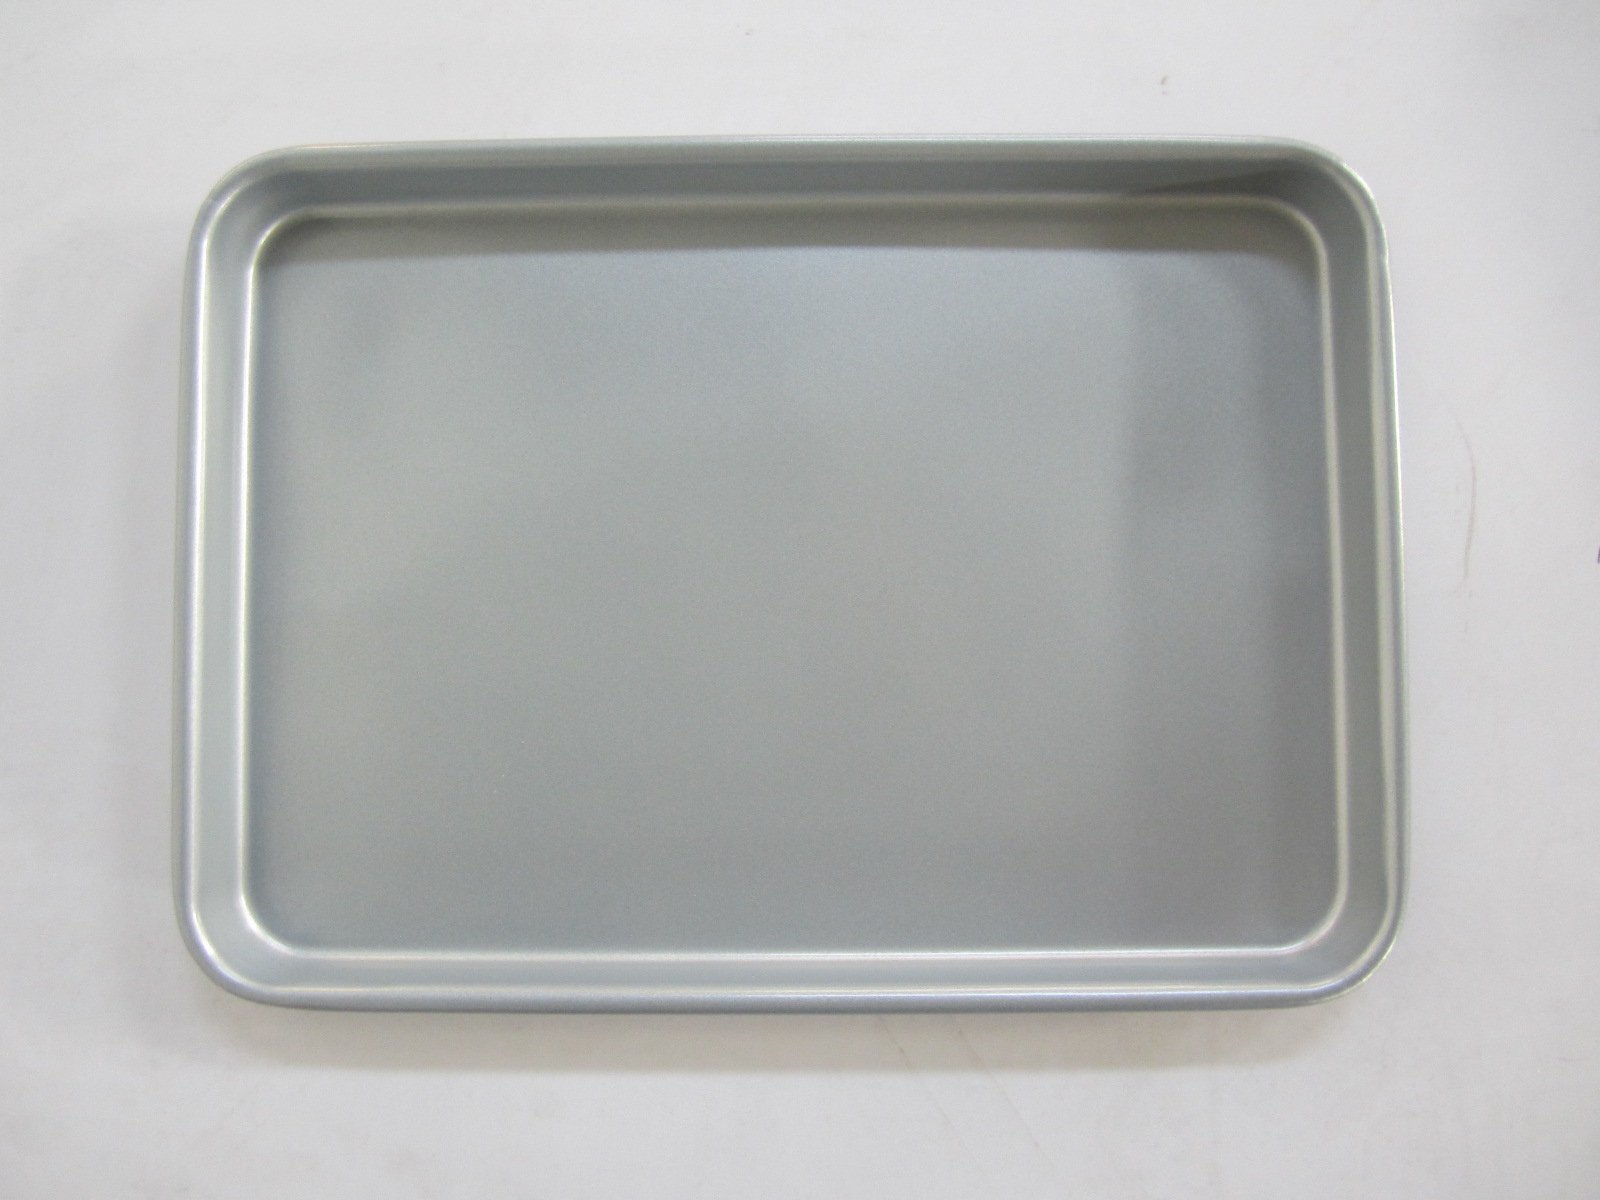 Amazon Bestseller Chinese Manufacturer ​Third Party Inspection Inspection Standard And Test Report of Baking Tray Frame Products Inspection Report Baking Tray Inspection